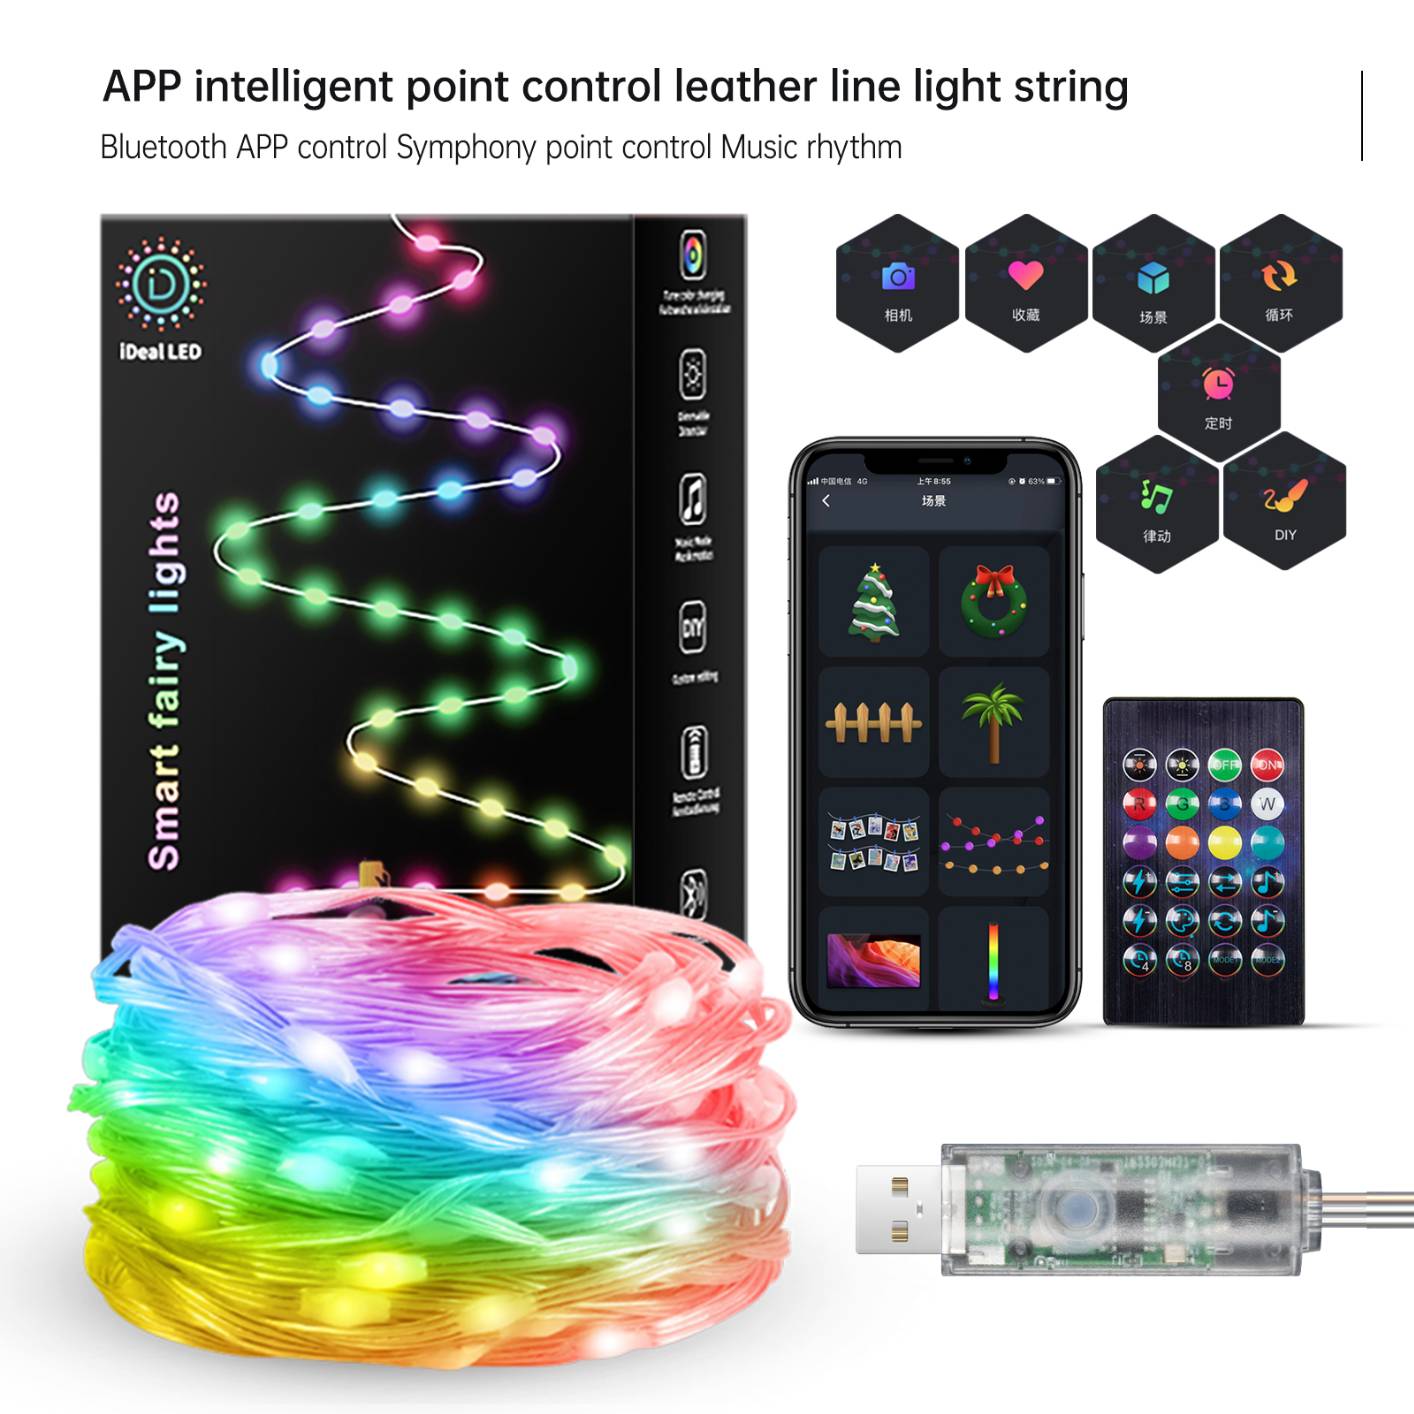 AUNONT smart point control leather wire lights string 10m 100 LED Color changing Fairy lights APP Bluetooth Christmas atmosphere decorative lights